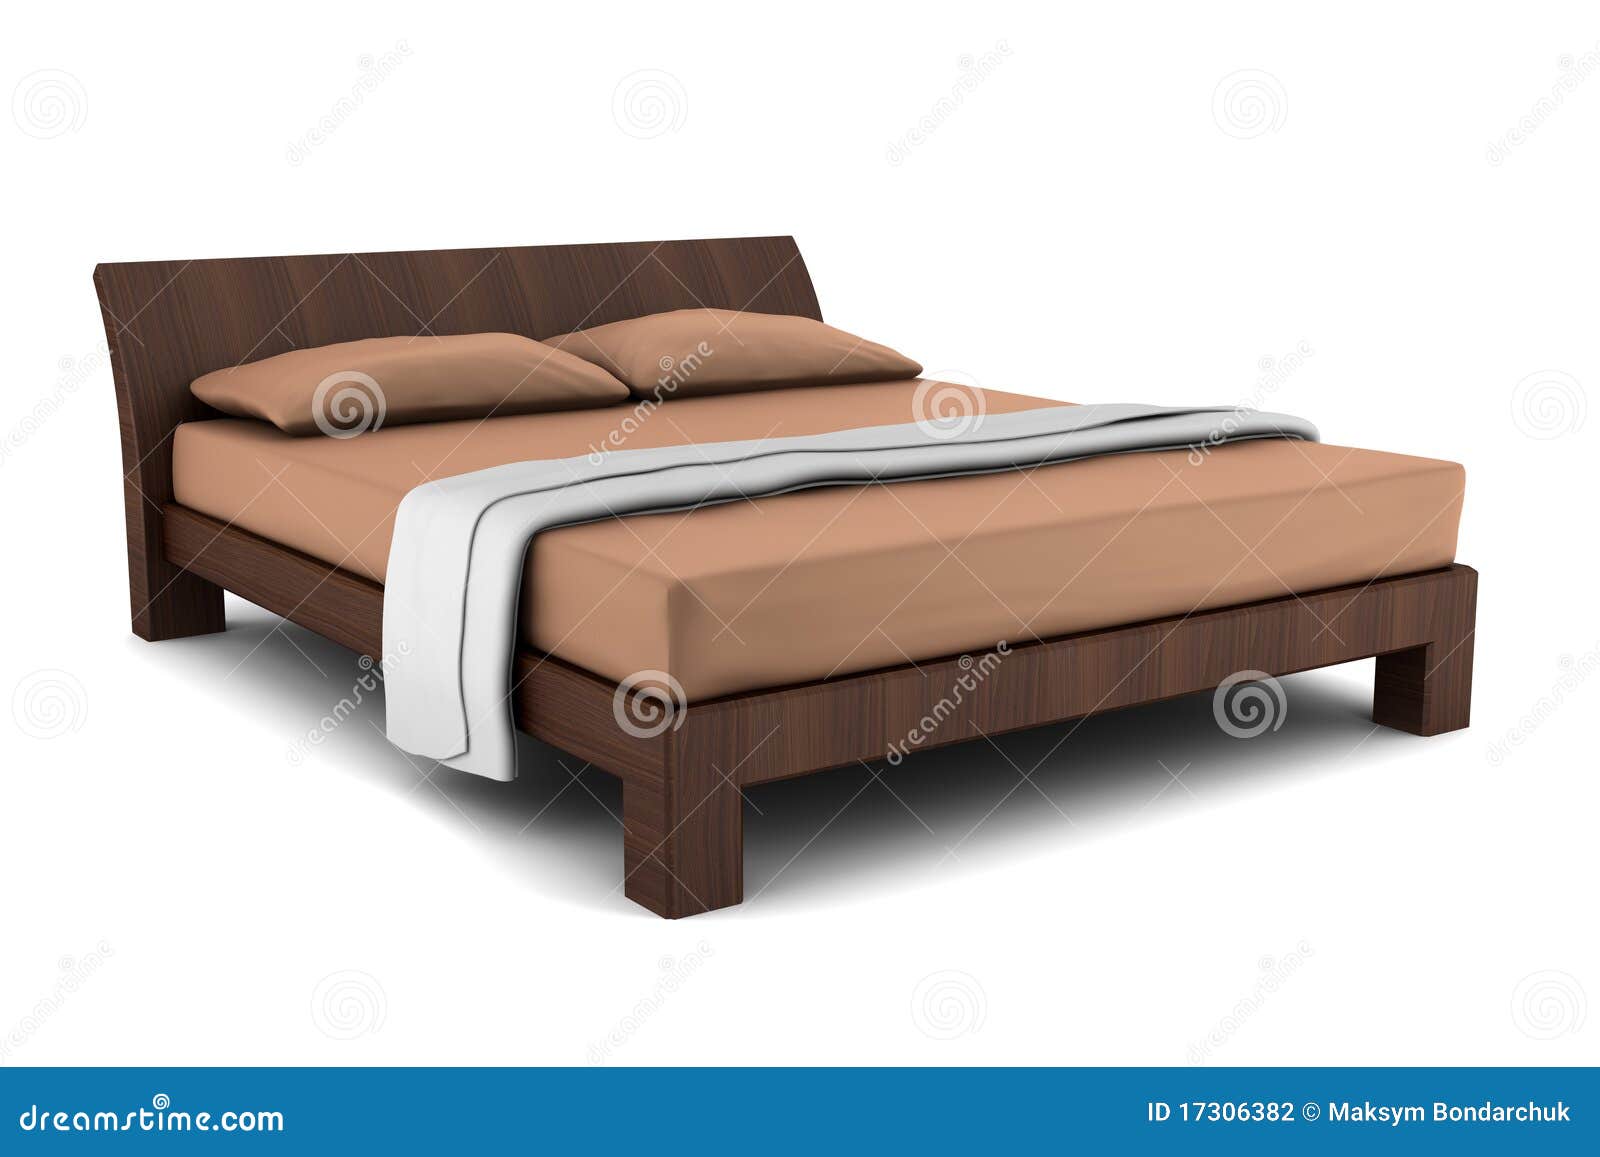 Wooden bed isolated on white background with clipping path.